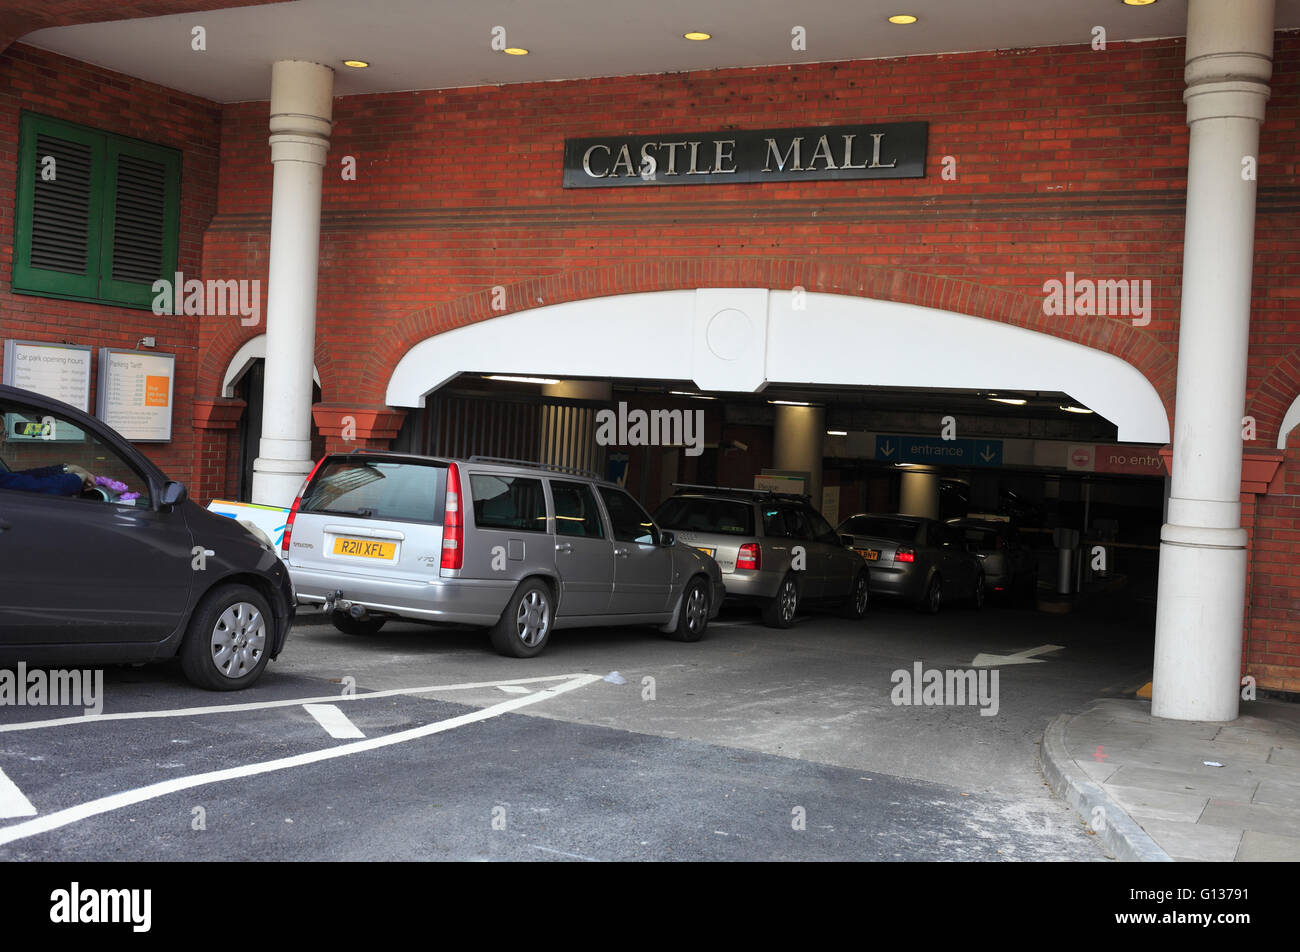 Cars queuing to get into Castle Mall car park in Norwich, Norfolk, UK. Stock Photo